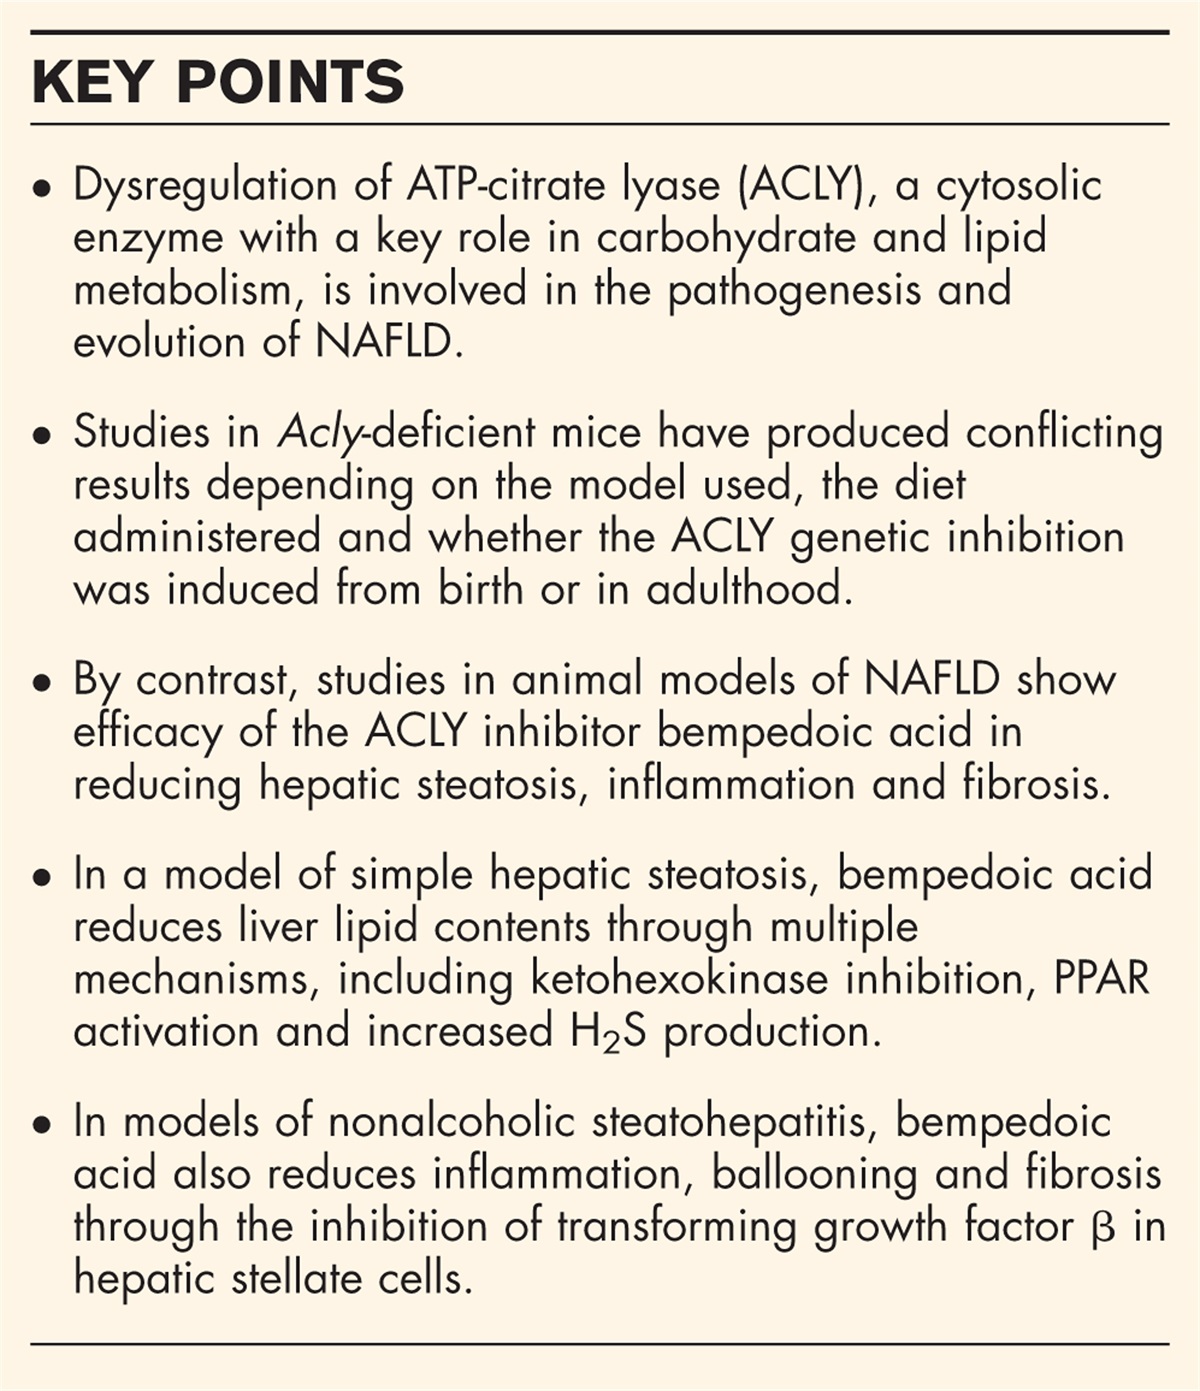 Bempedoic acid for nonalcoholic fatty liver disease: evidence and mechanisms of action